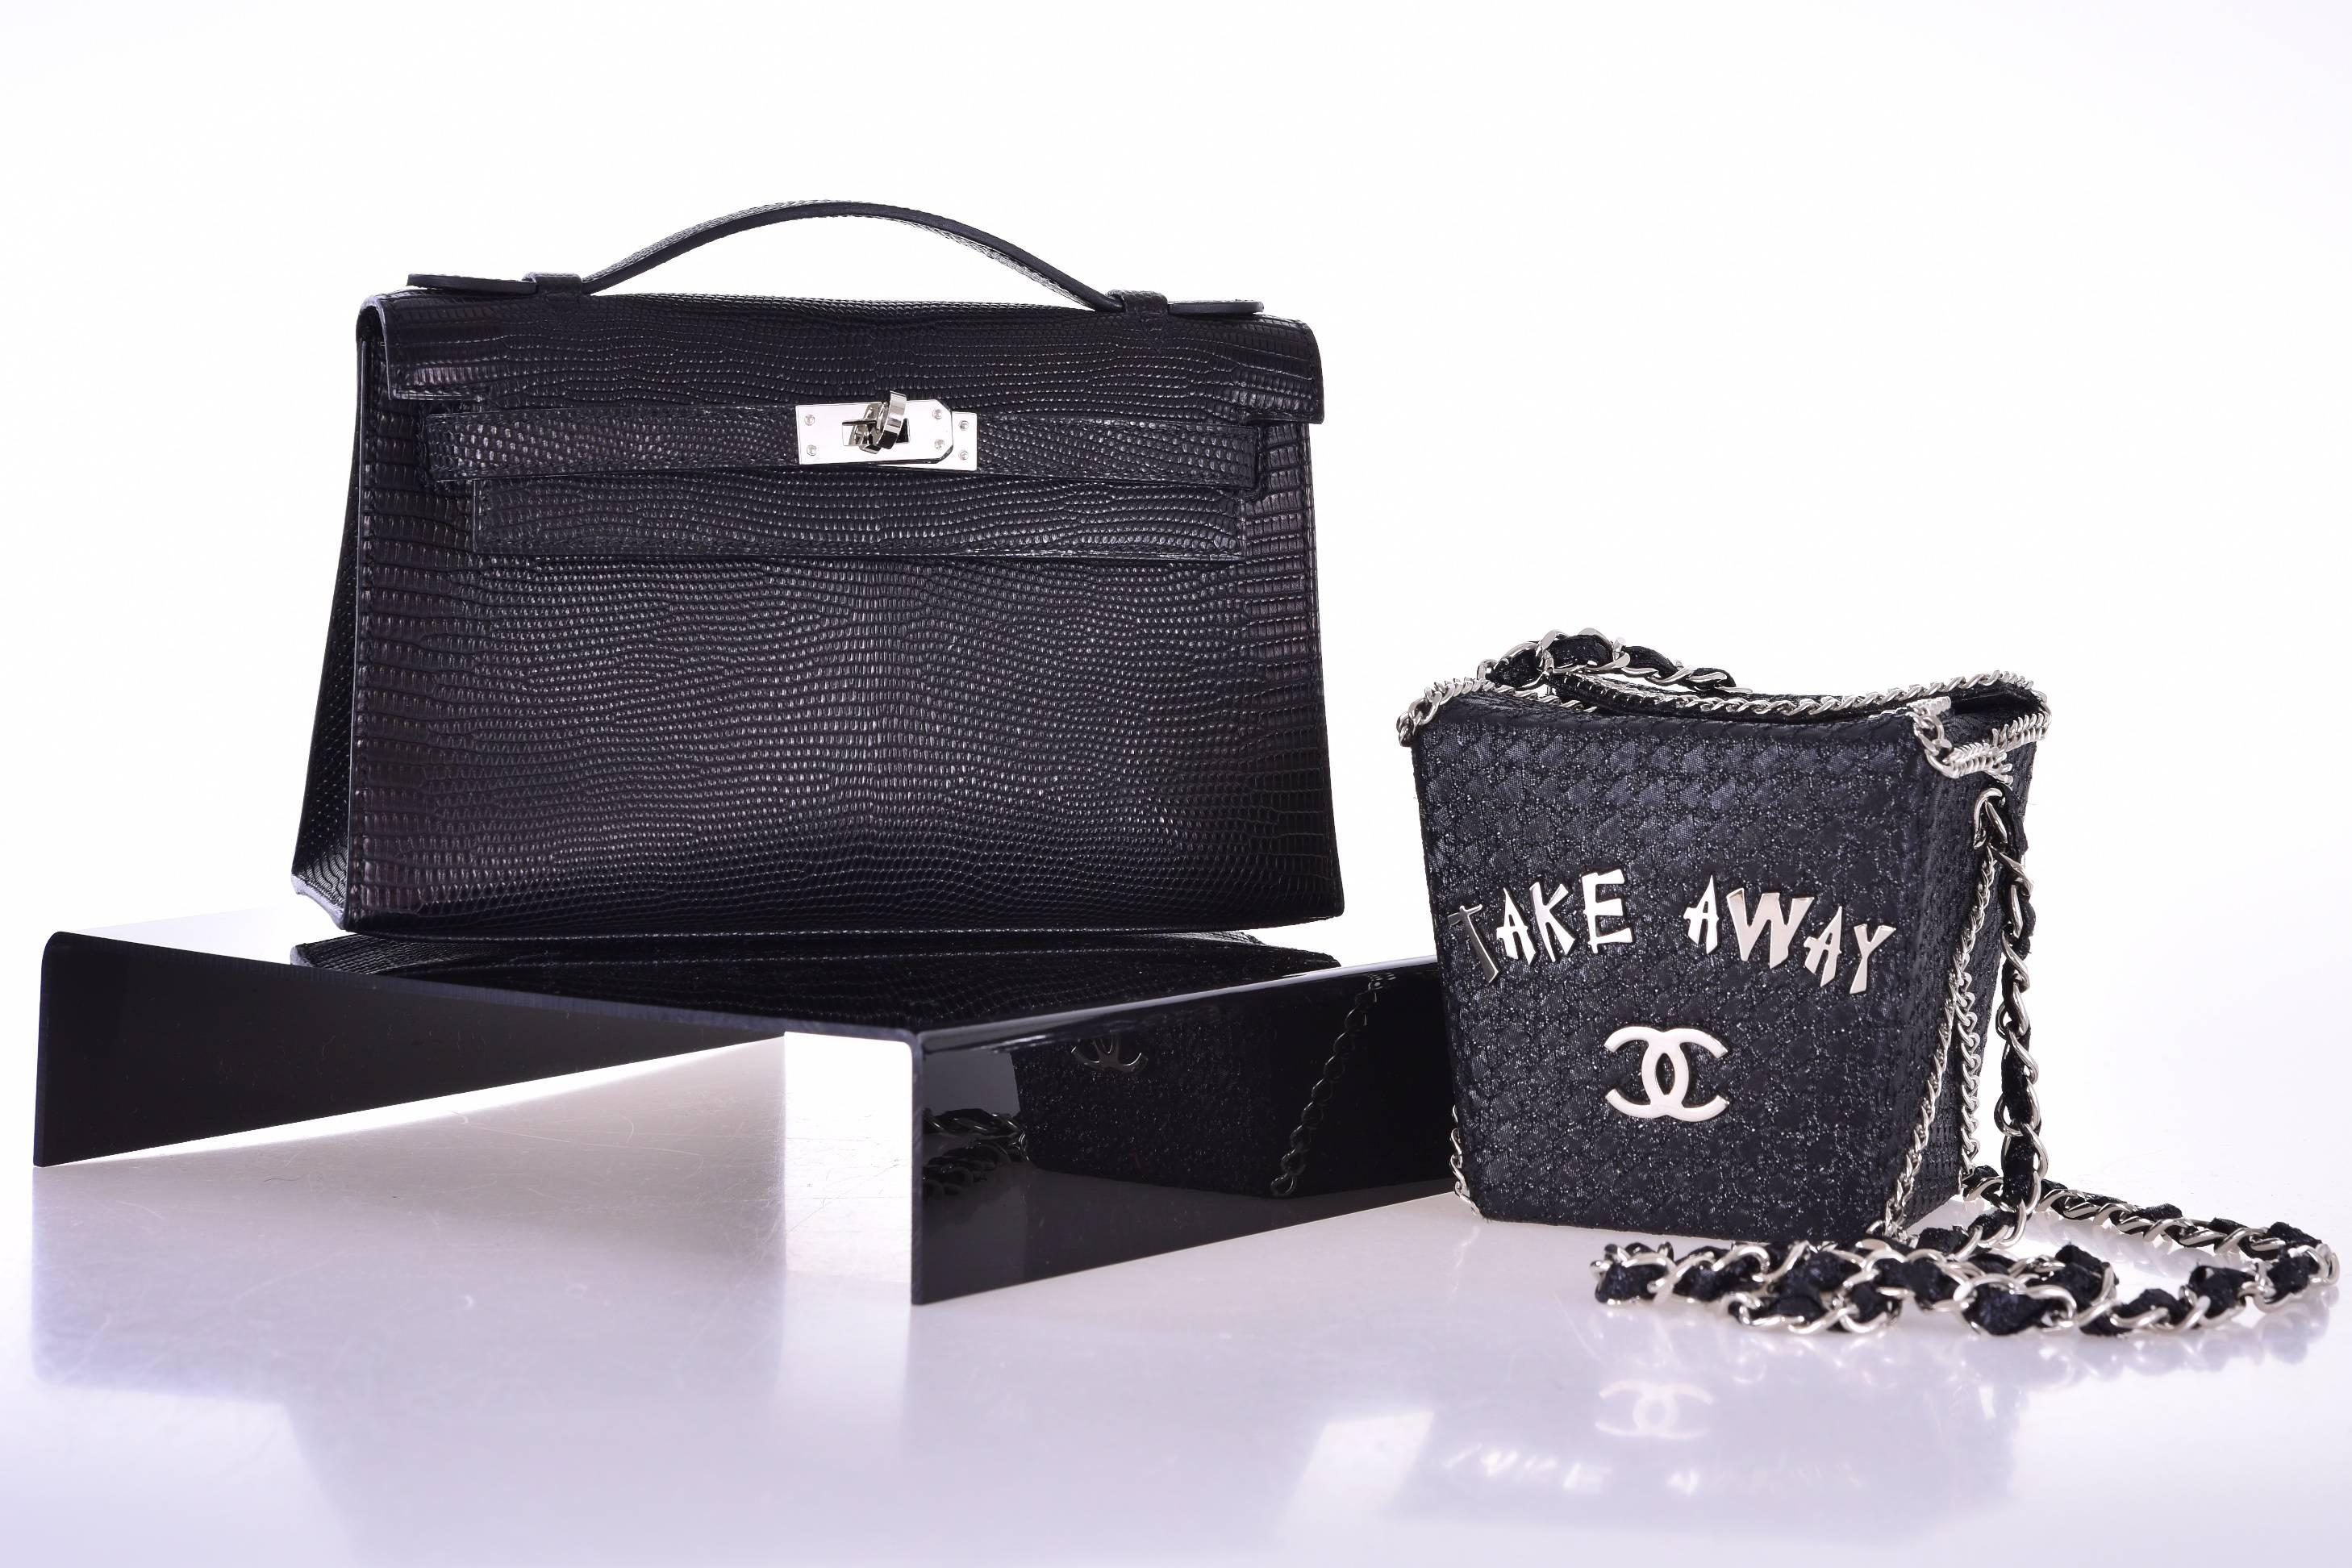 Collectors Chanel TakeAway Bag Shanghai World Expo 2010 JaneFinds 1